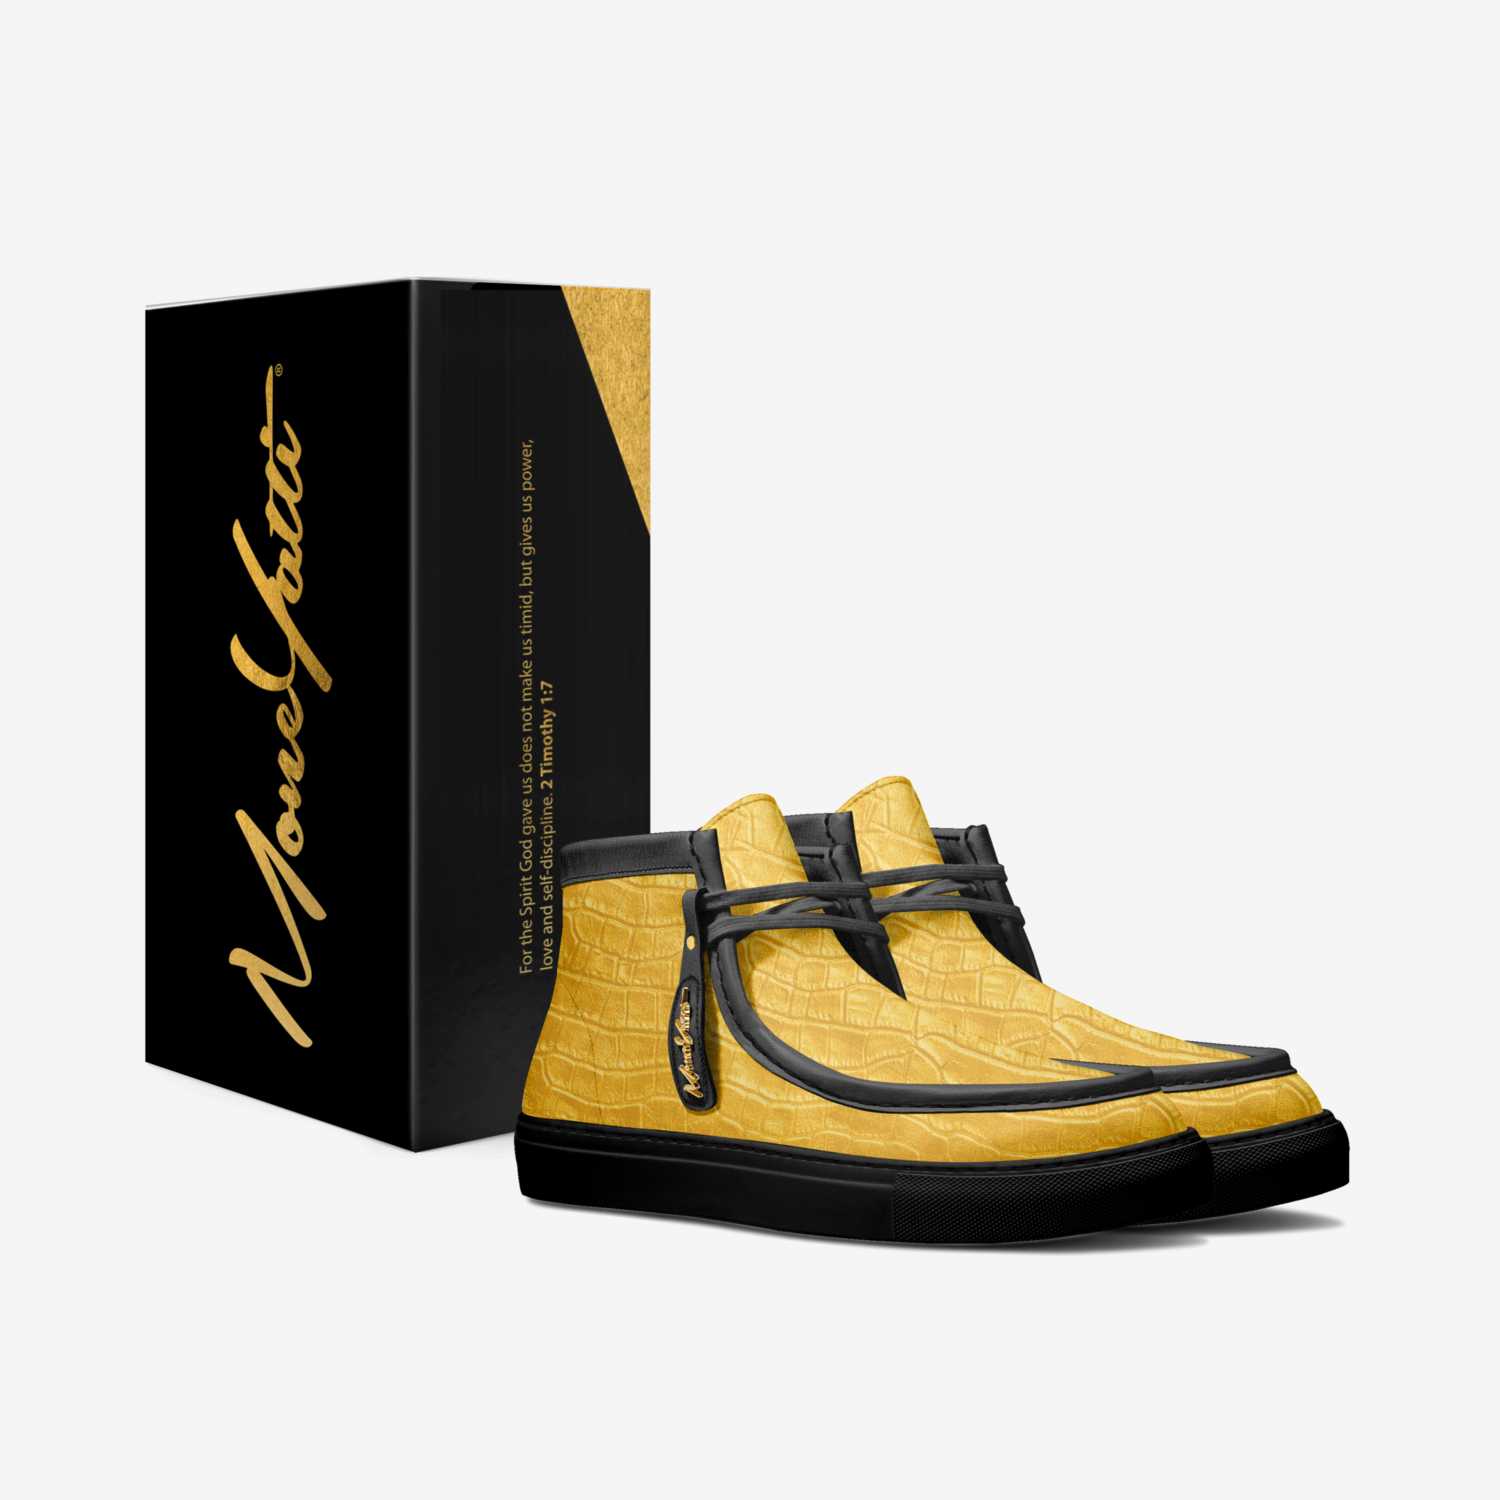 LUX 023 custom made in Italy shoes by Moneyatti Brand | Box view